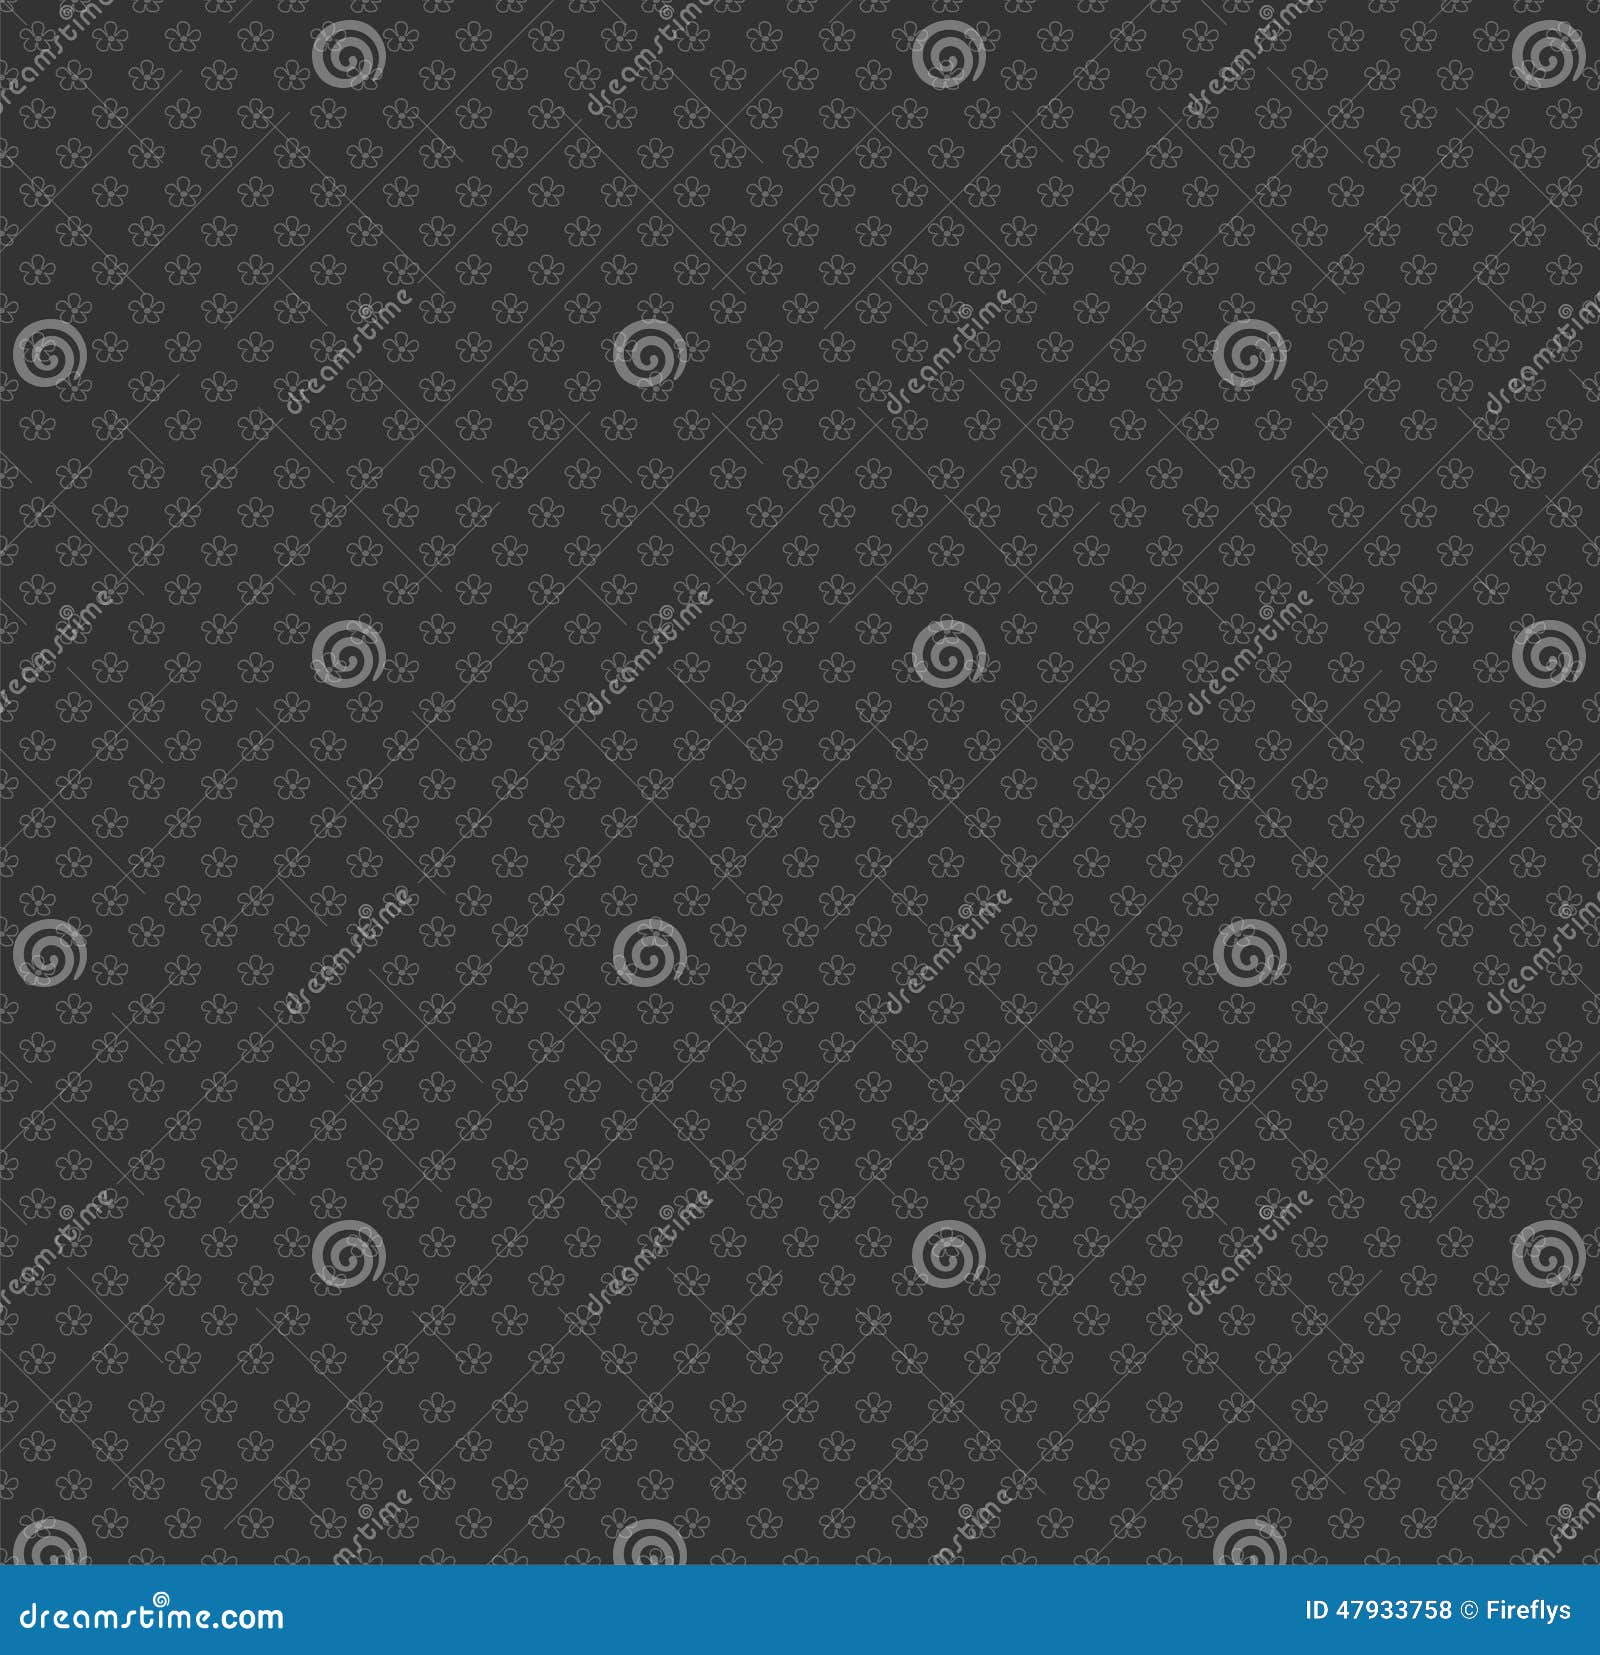 Abstract Gray Background Seamless Floral Pattern 47933758 